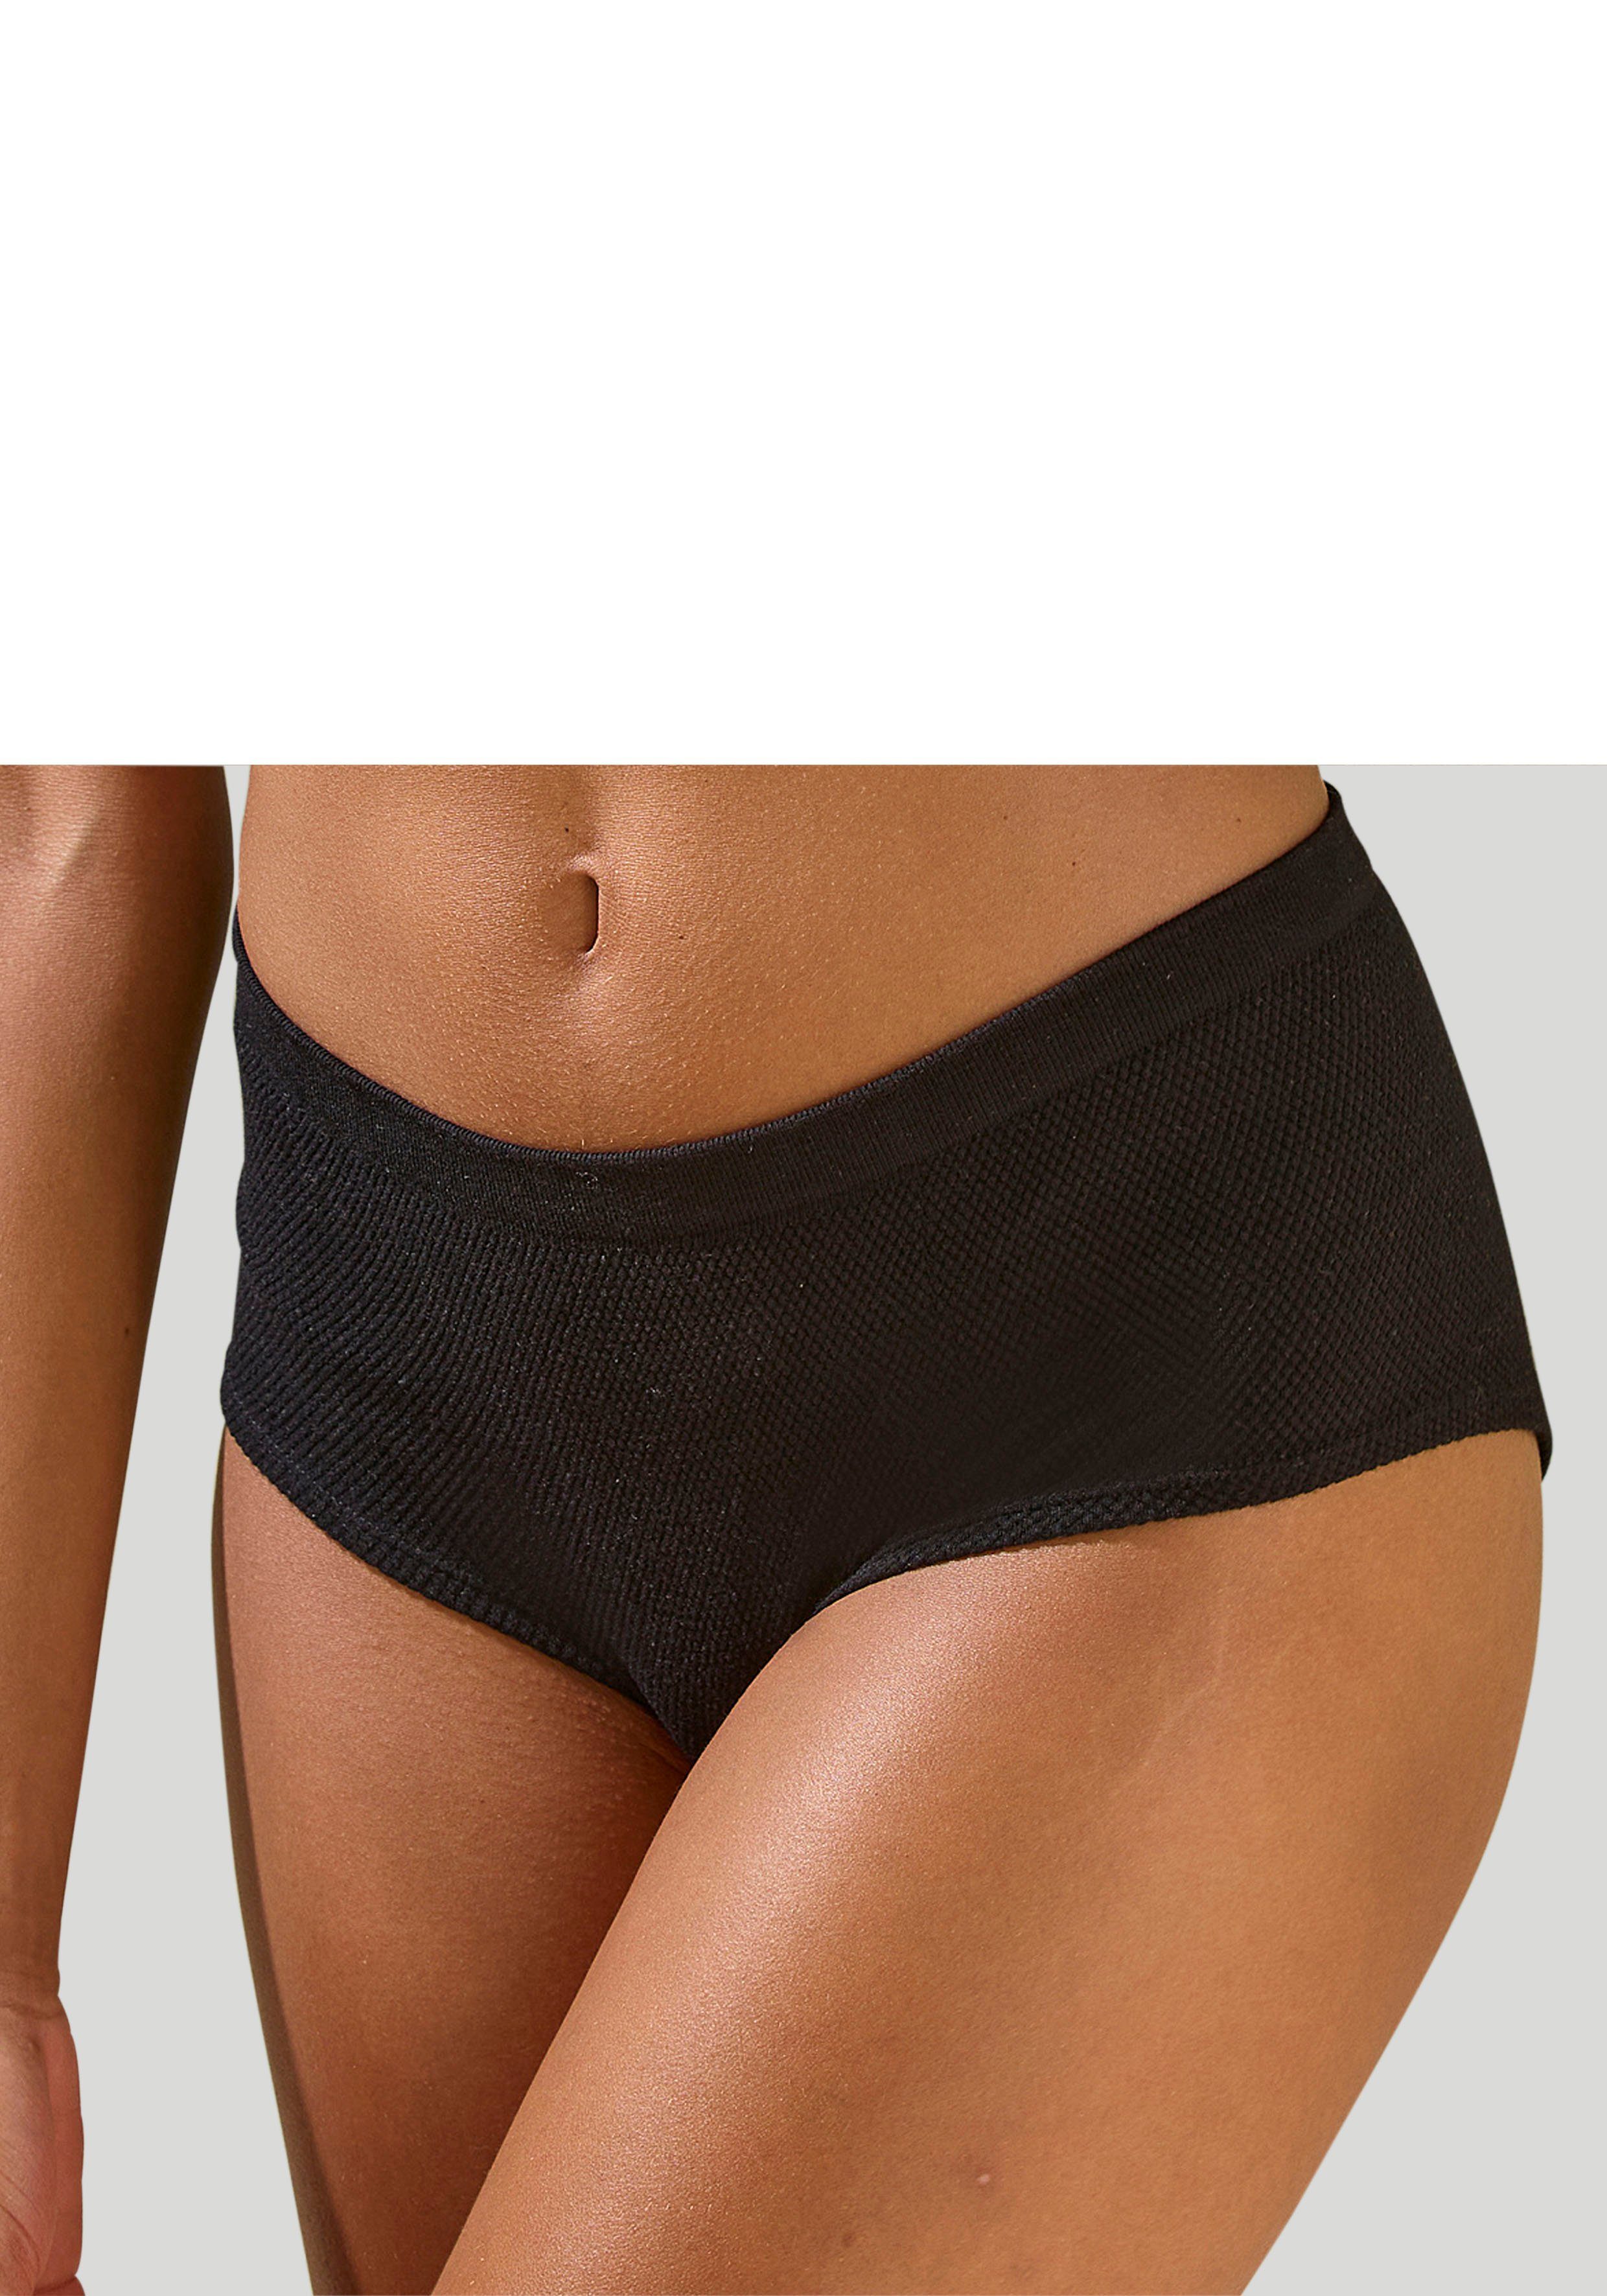 Lascana Hipster online kaufen | OTTO | Hipster-Panties